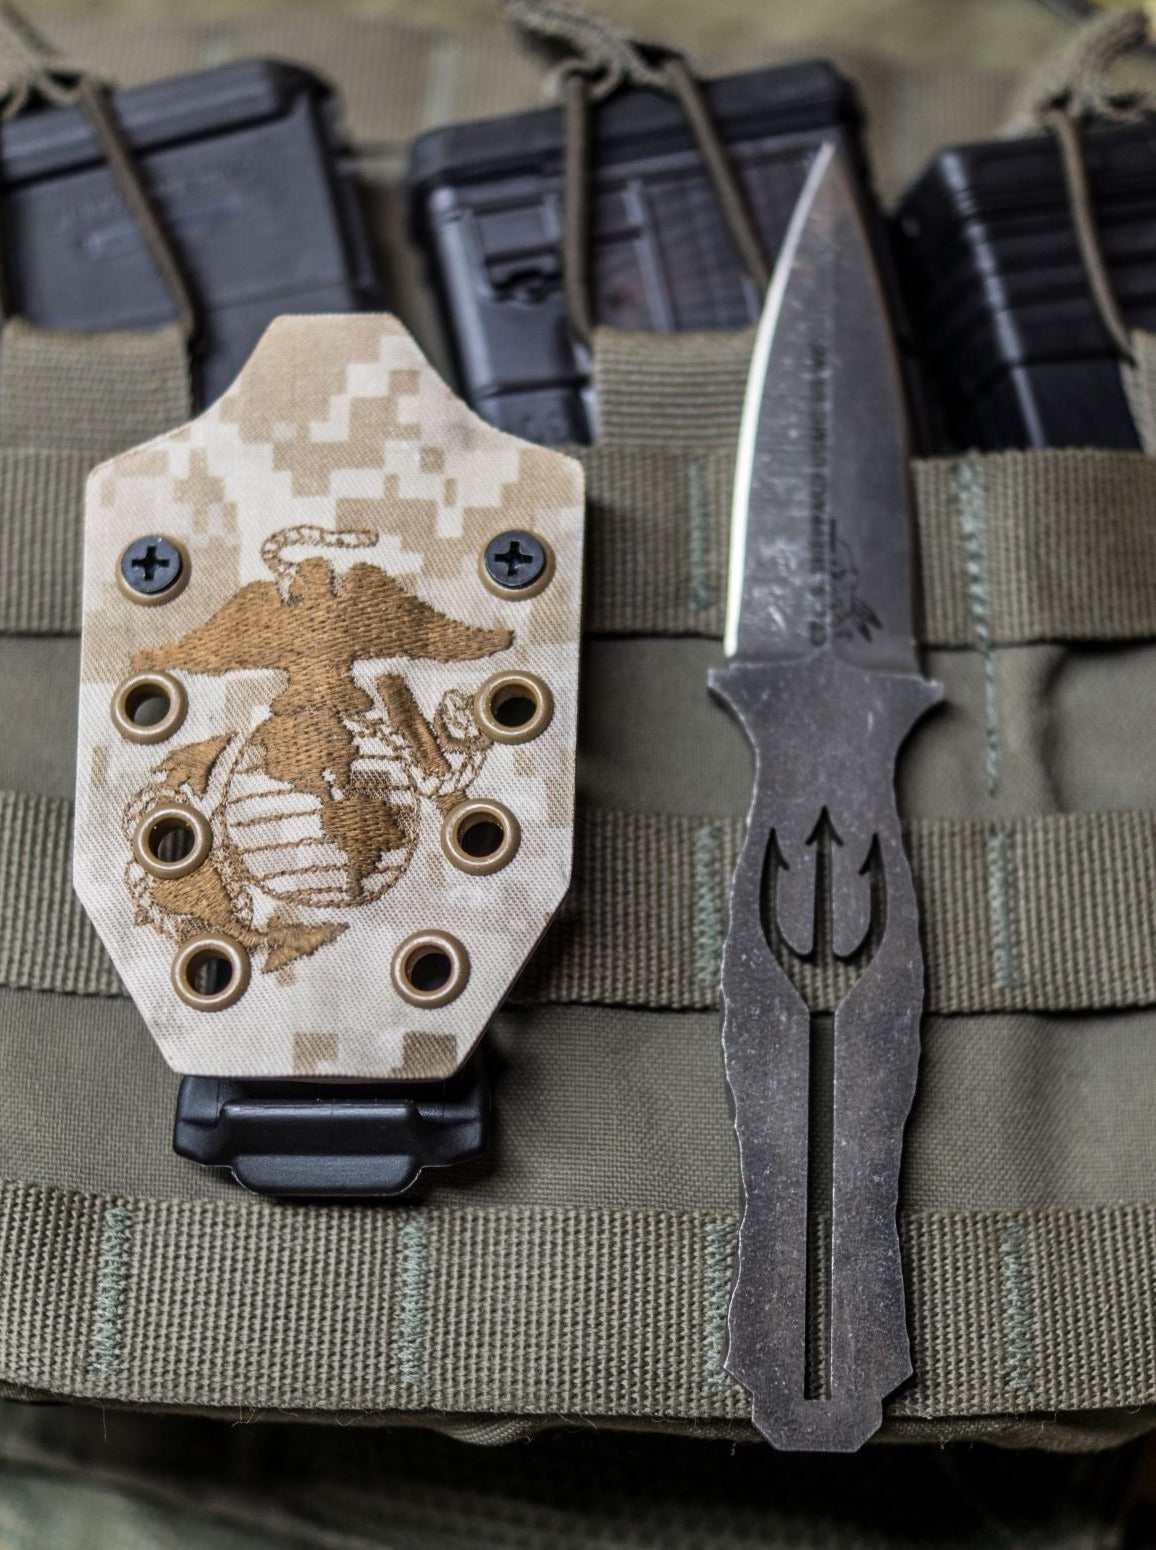 Half Face Blades knife sheath using USMC uniform material to adhere to the Kydex.